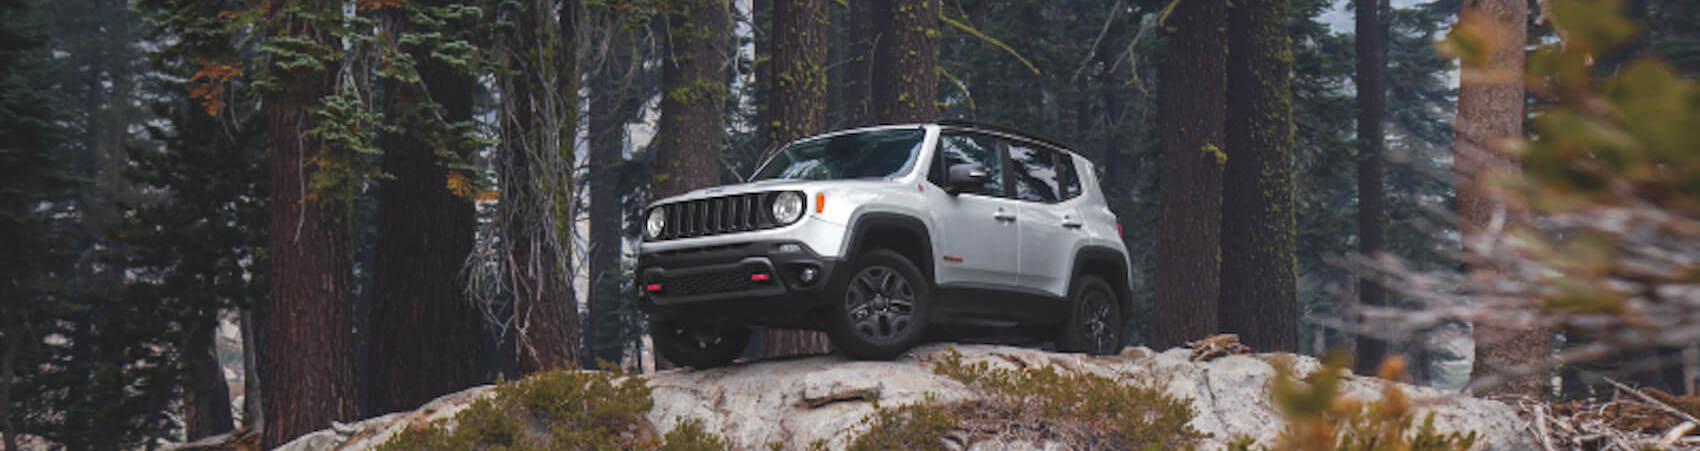 Jeep Renegade Review